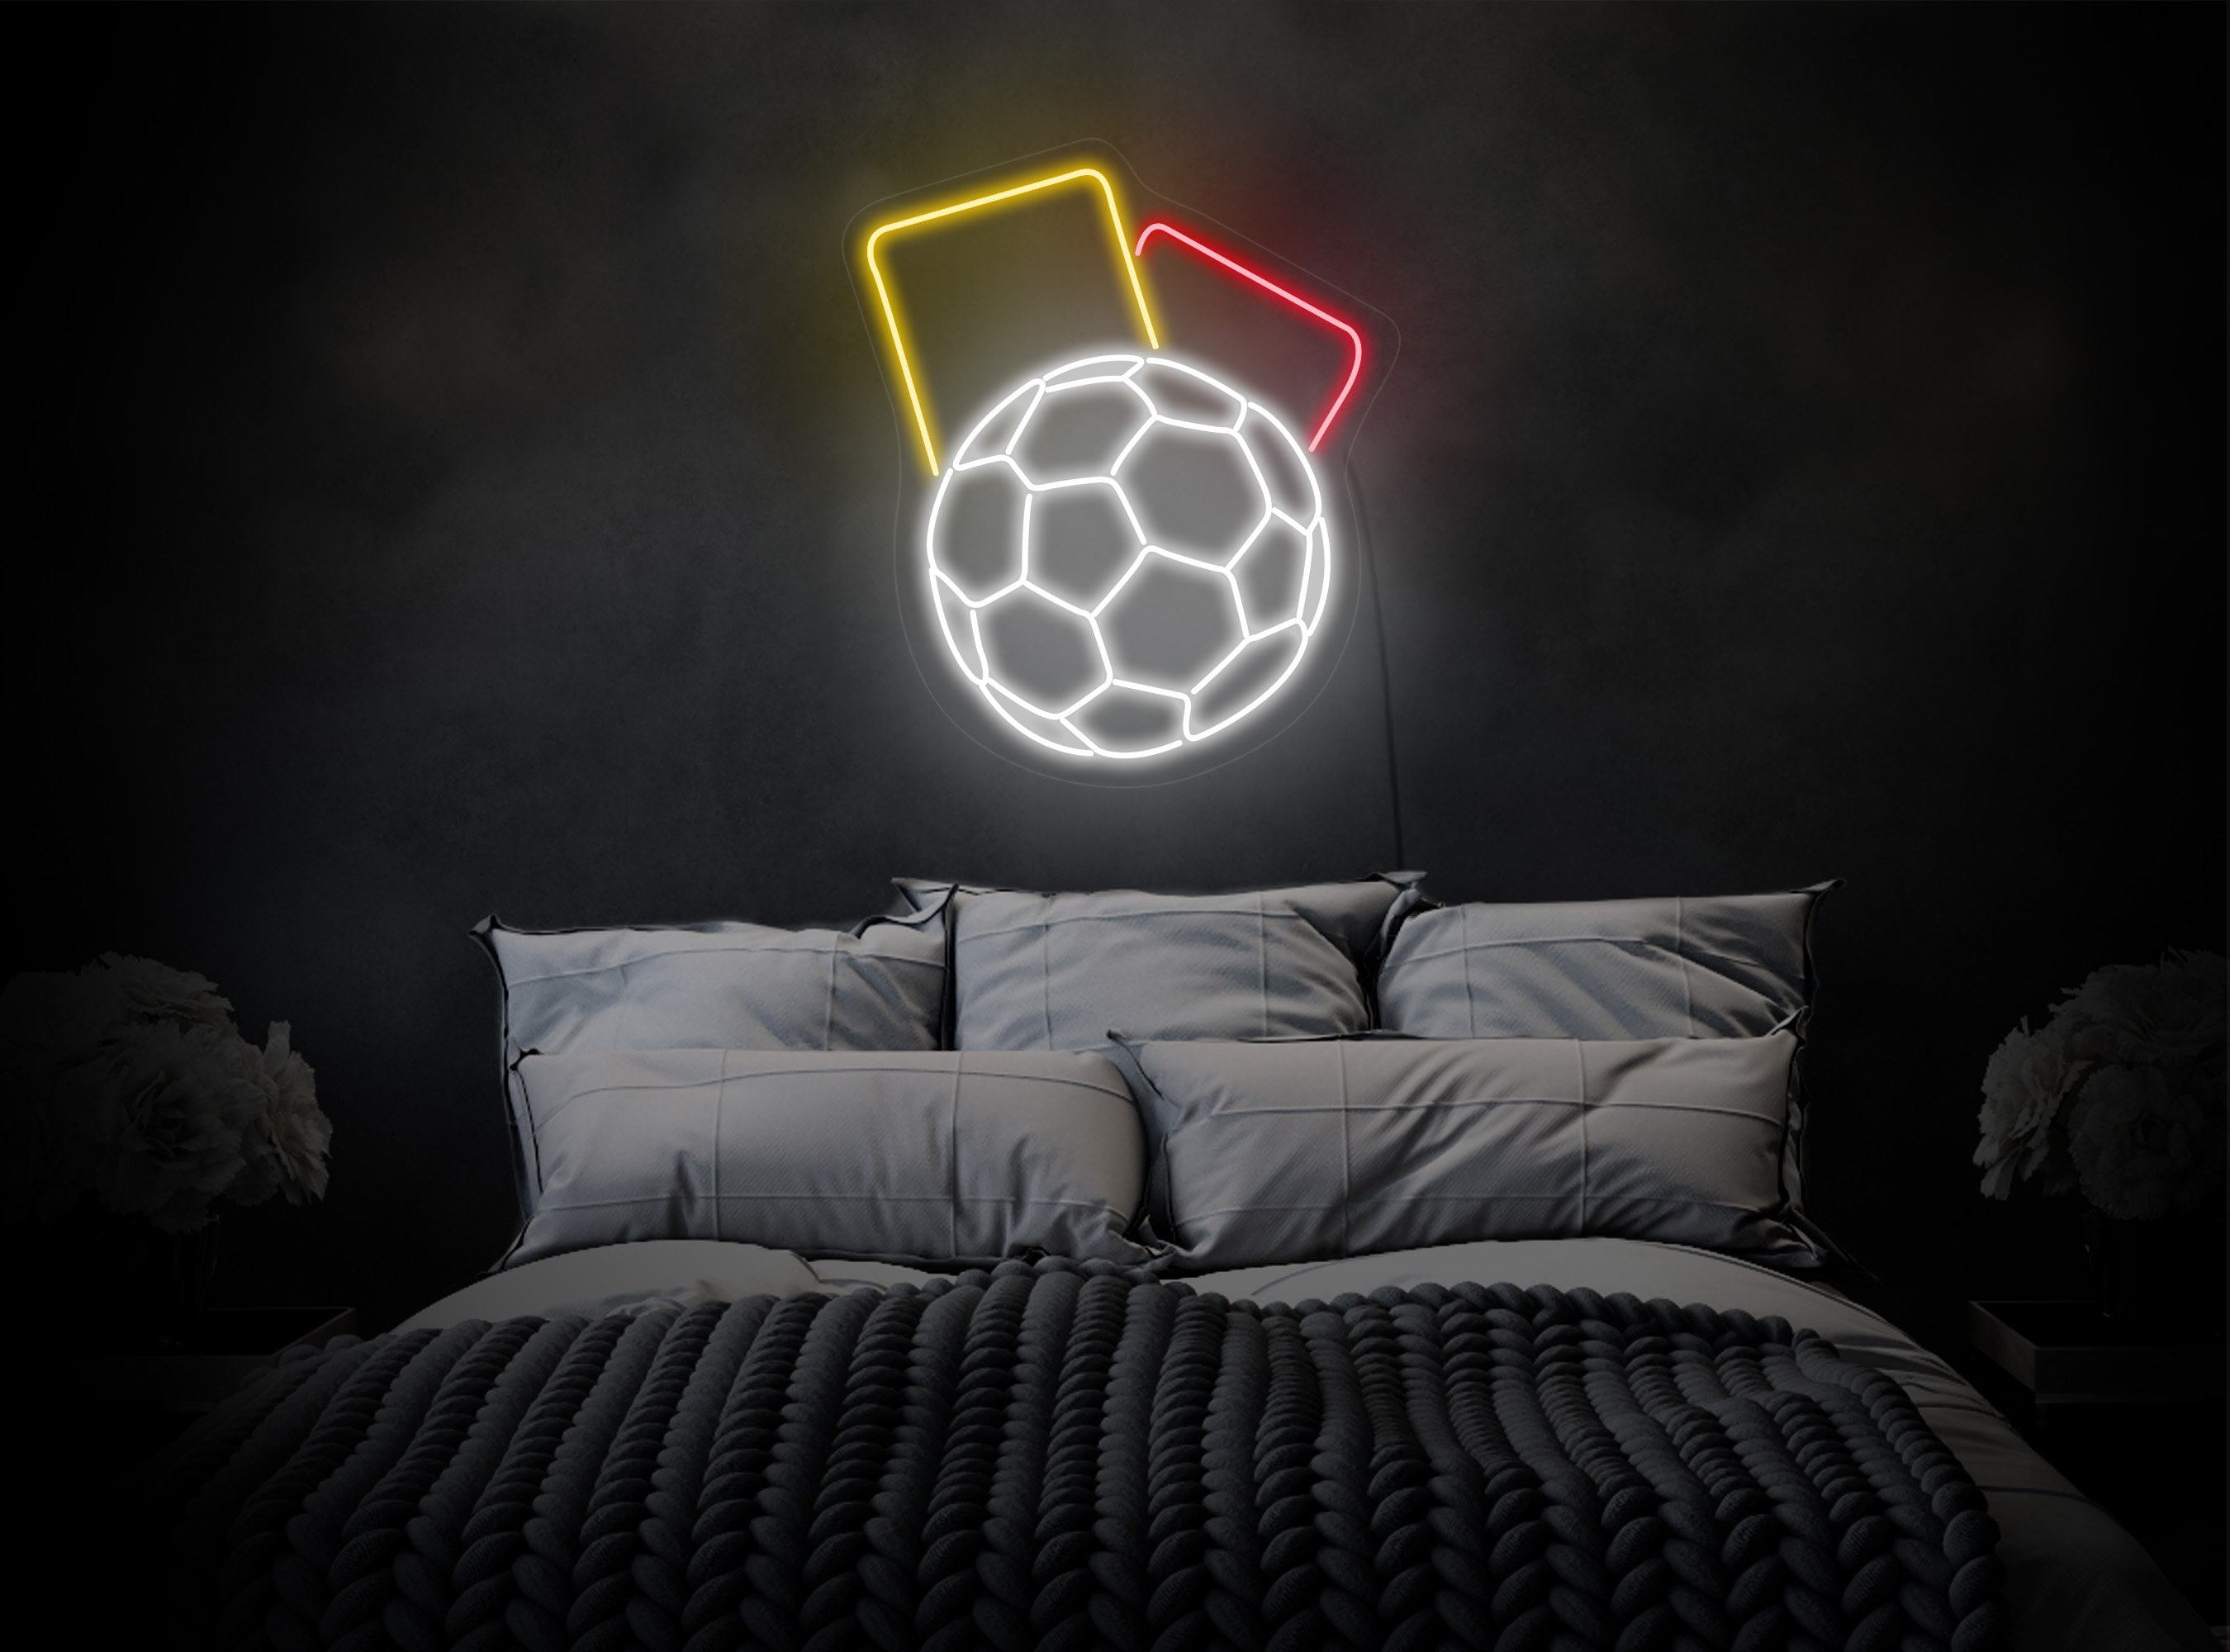 Personalized Soccer Jersey Neon Sign, Wall Hanging Decoration, Birthday Gift for Soccer Loving Son, Kids Room Wall Art, Soccer Jersey Neon Lamp